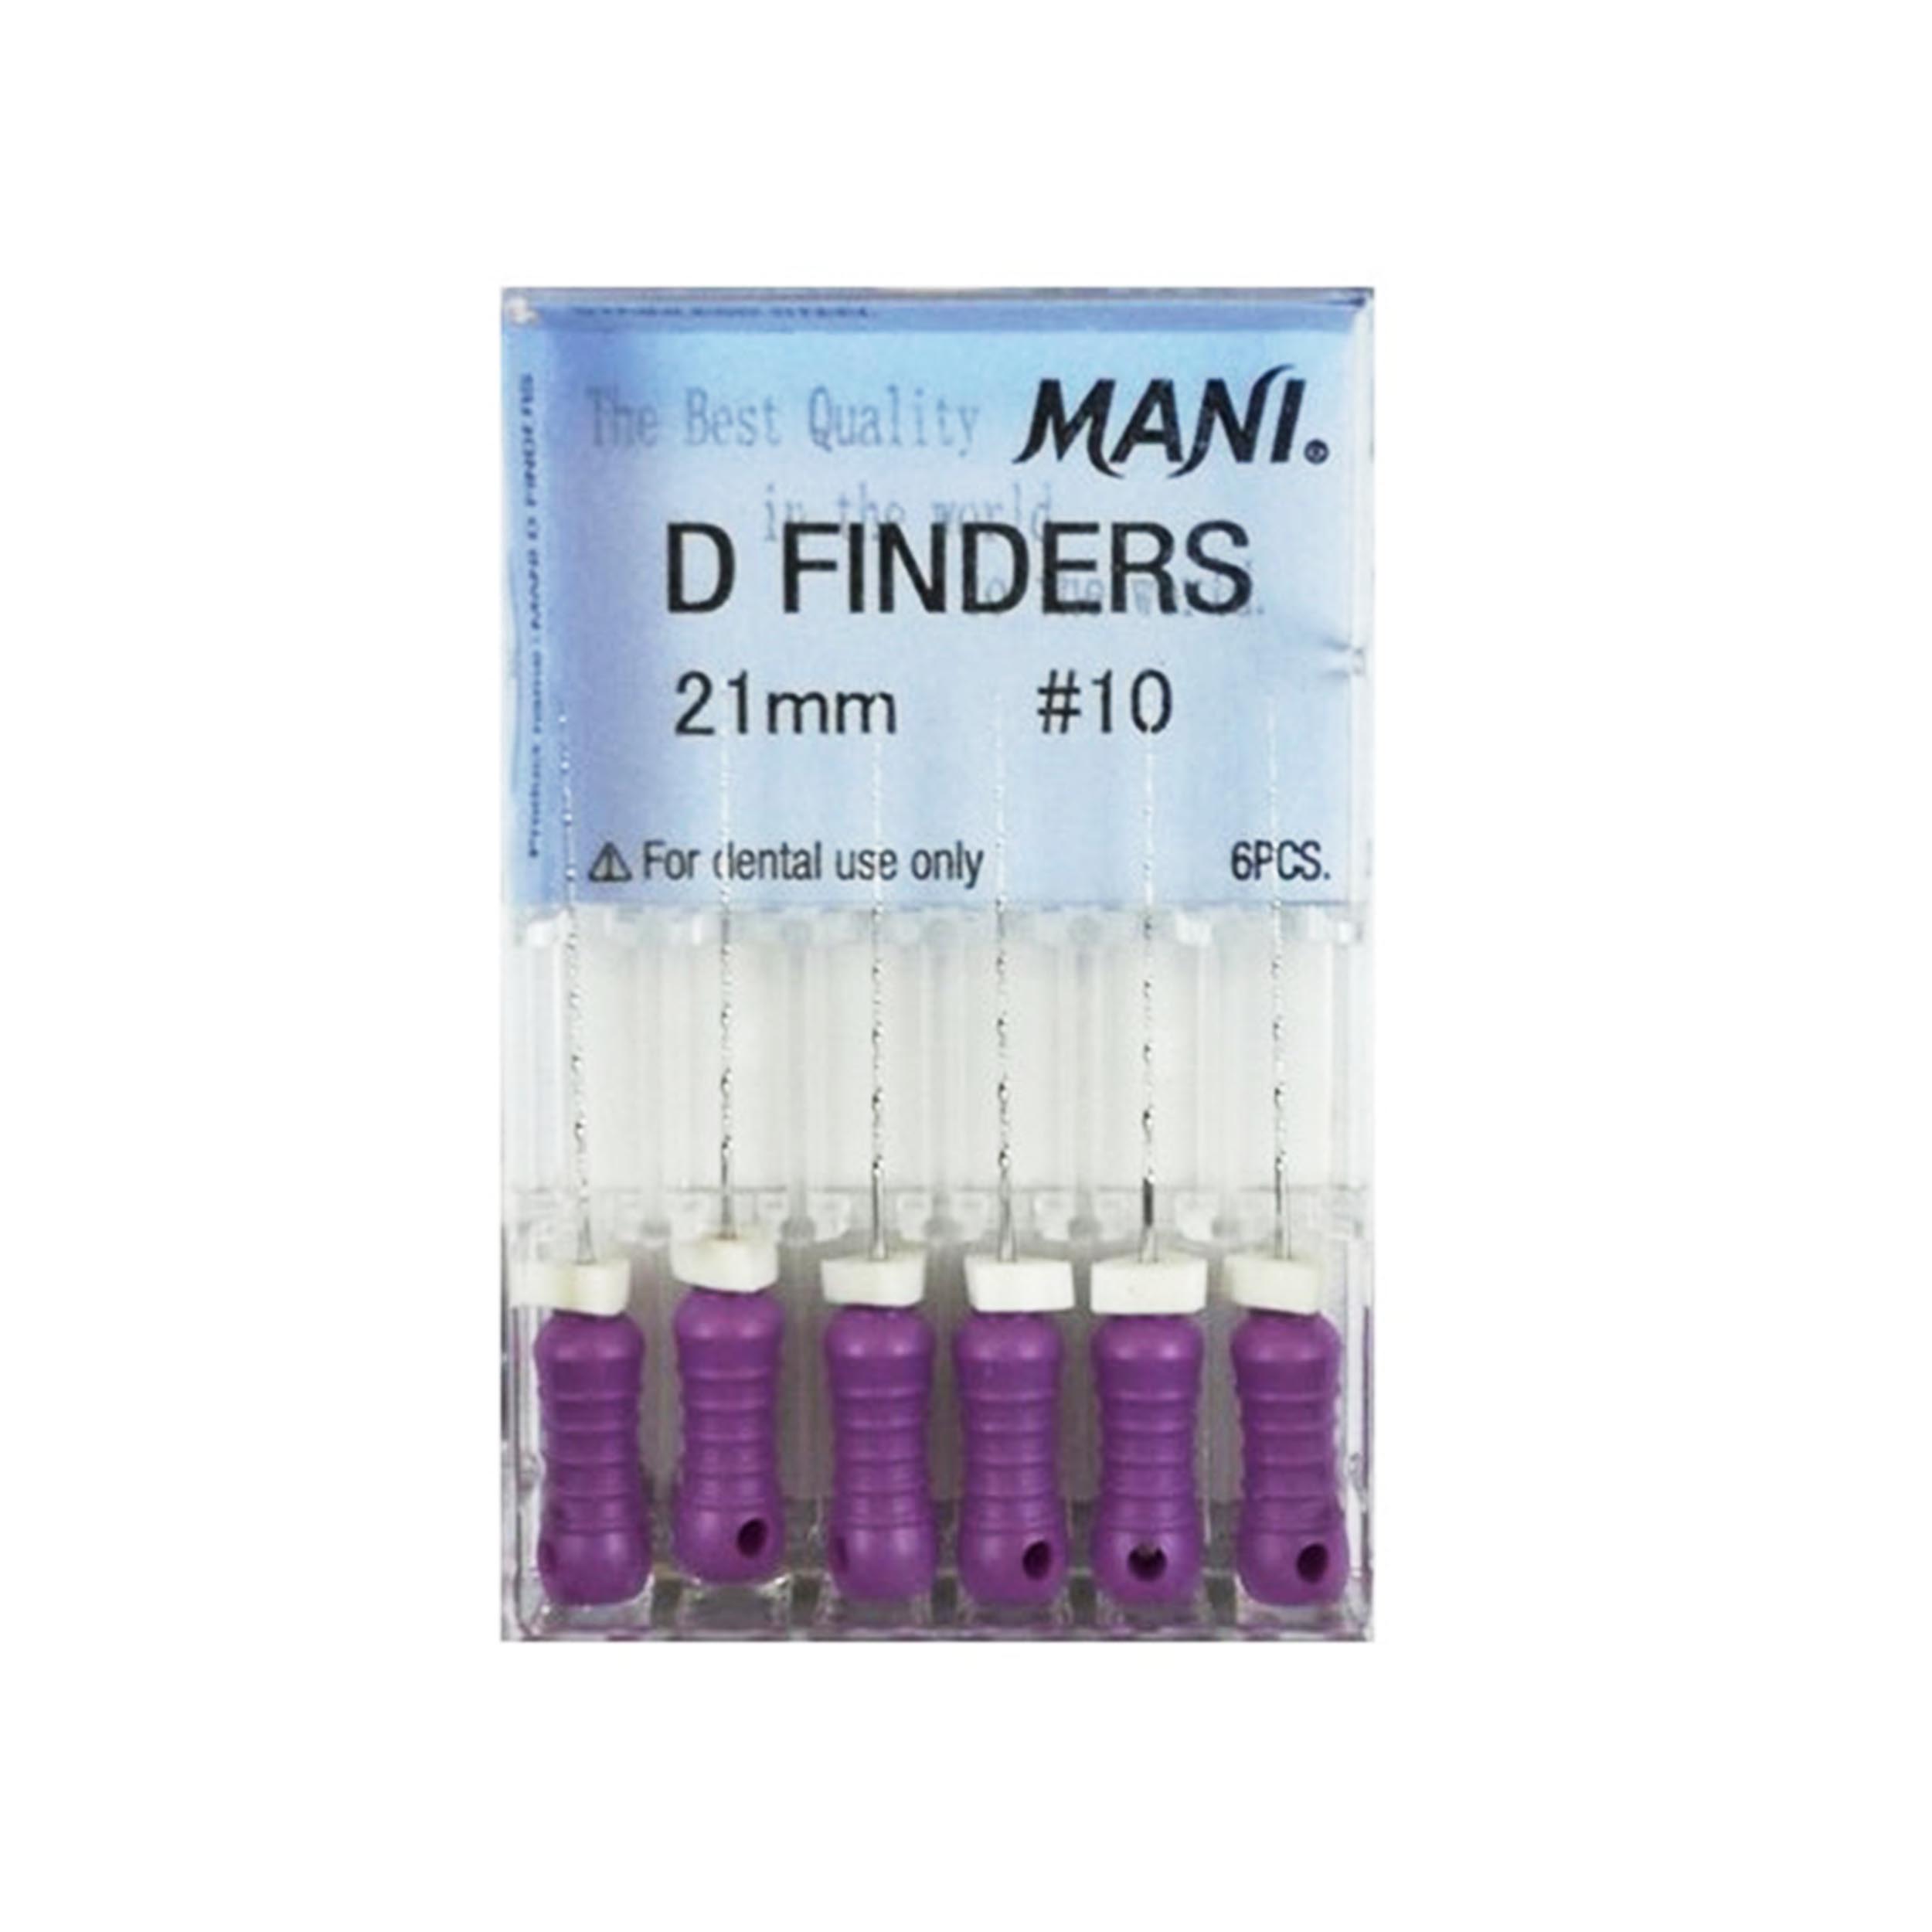 Mani D Finder Root Canal Files 08 (21mm)